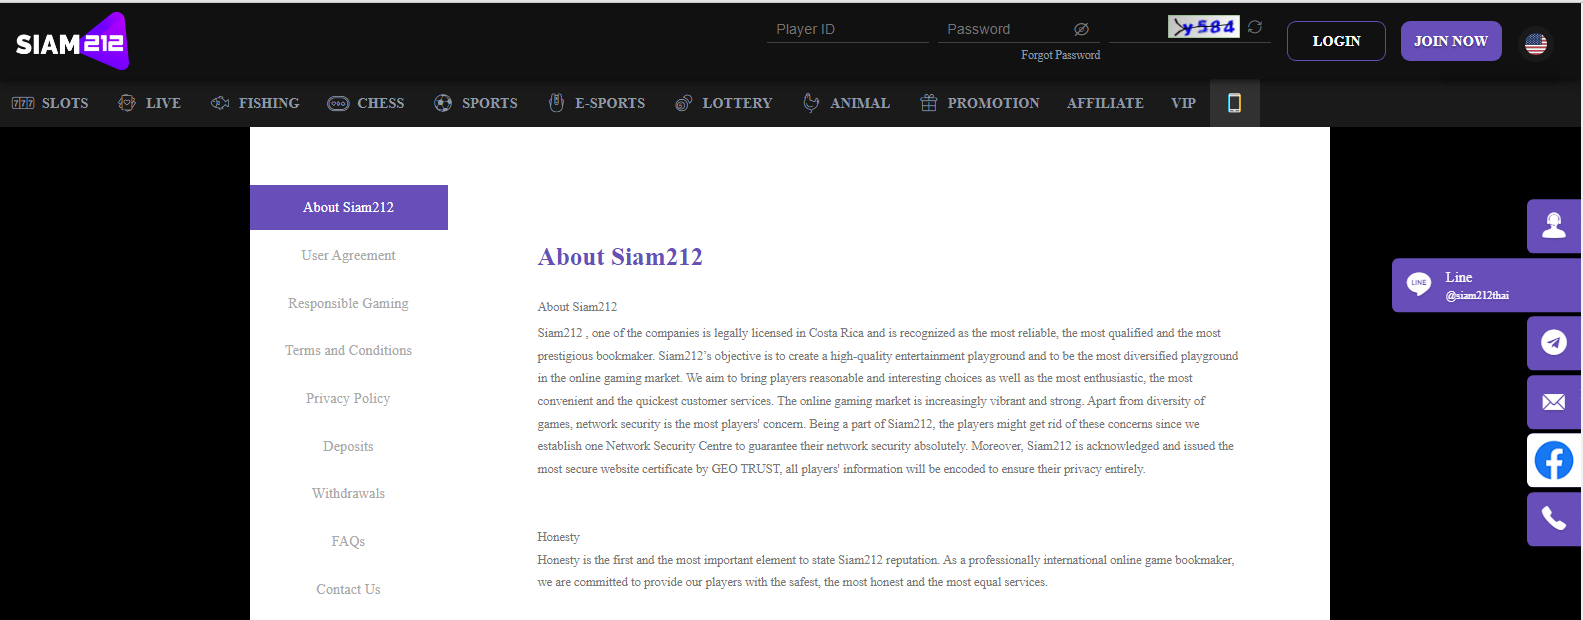 Siam212 Customer Support and Service